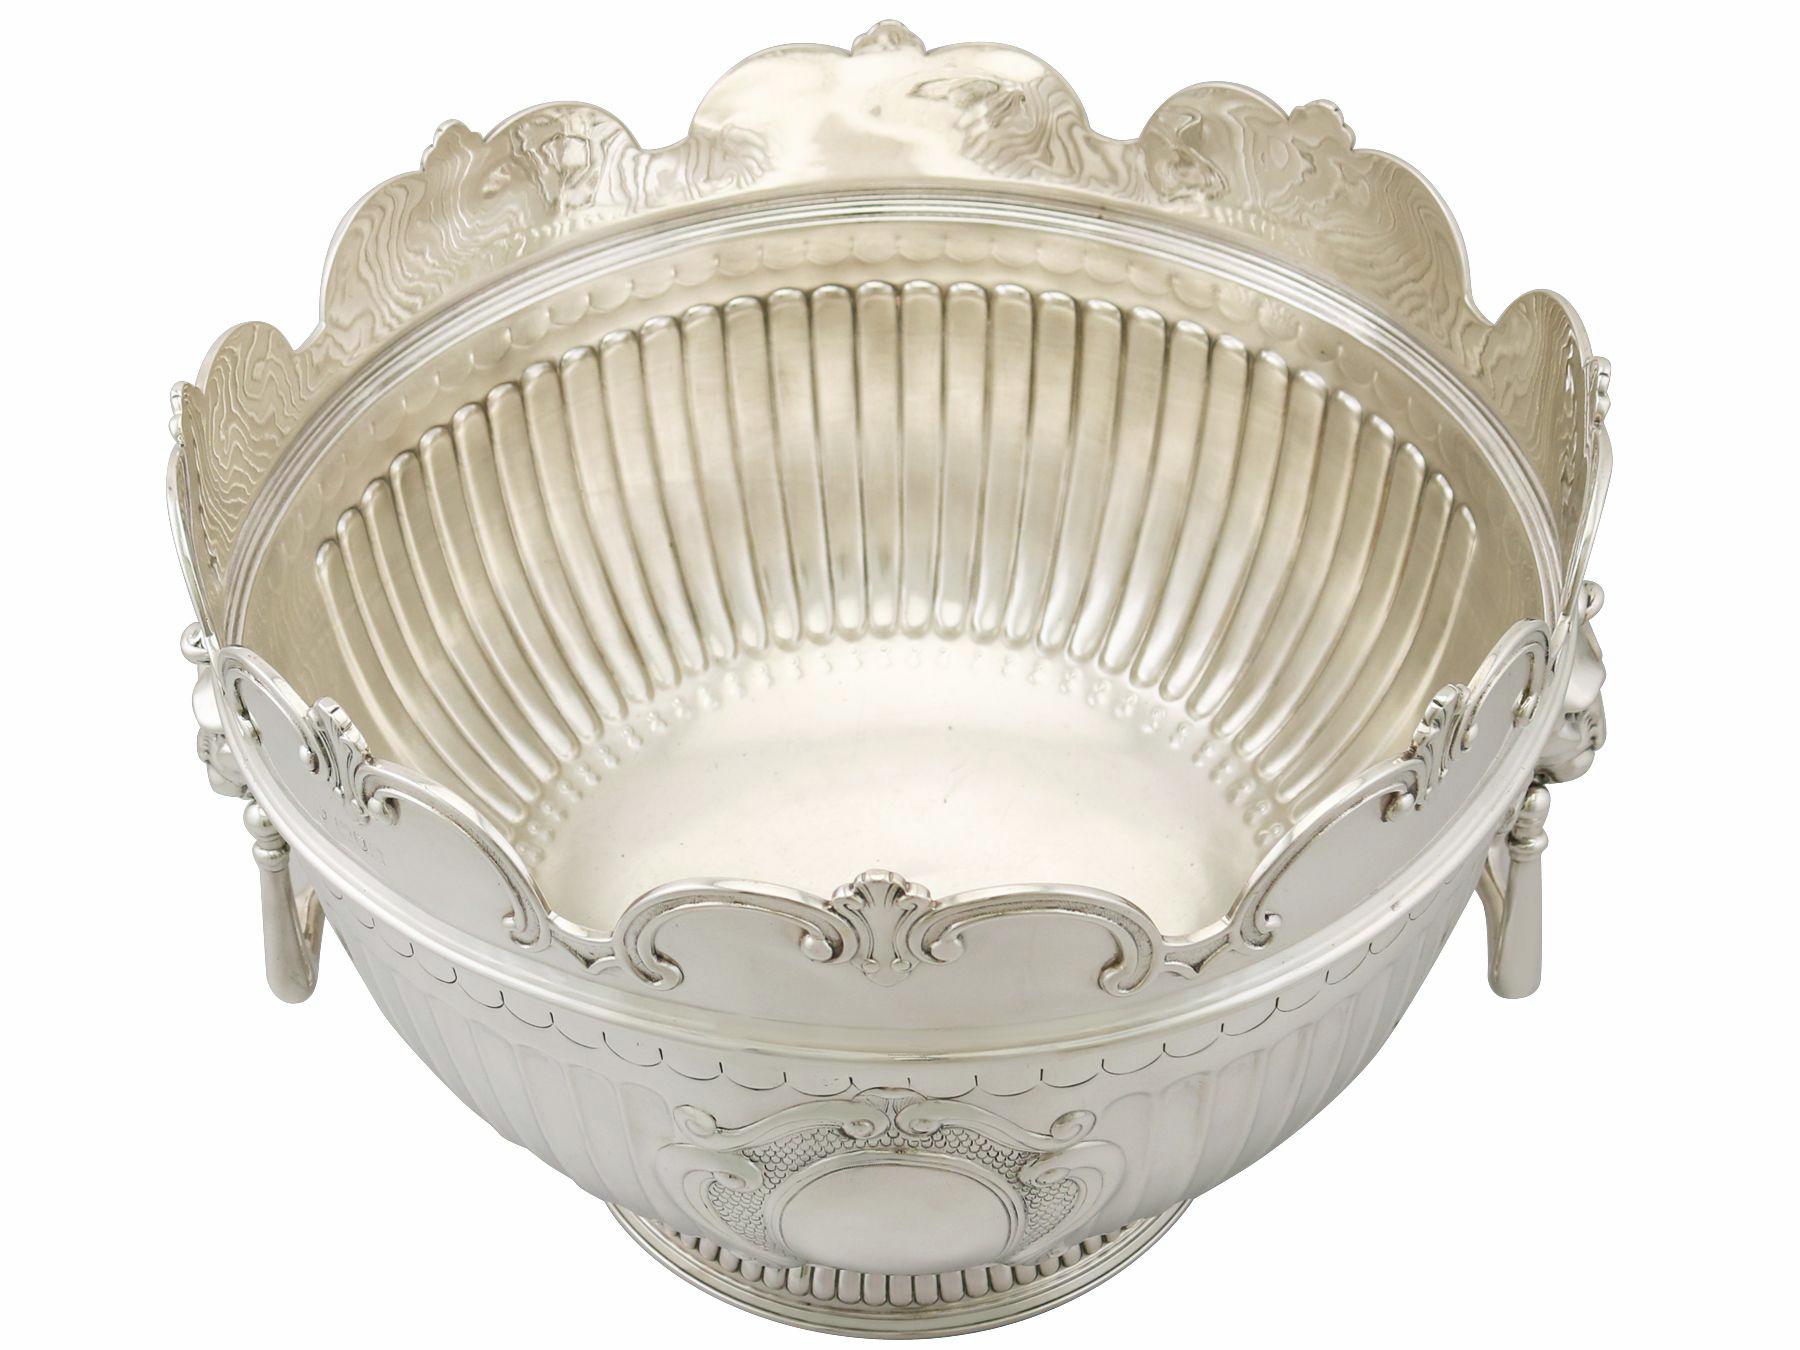 Edwardian Large Sterling Silver Monteith Style Bowl by Edward Barnard & Sons Ltd, Antique